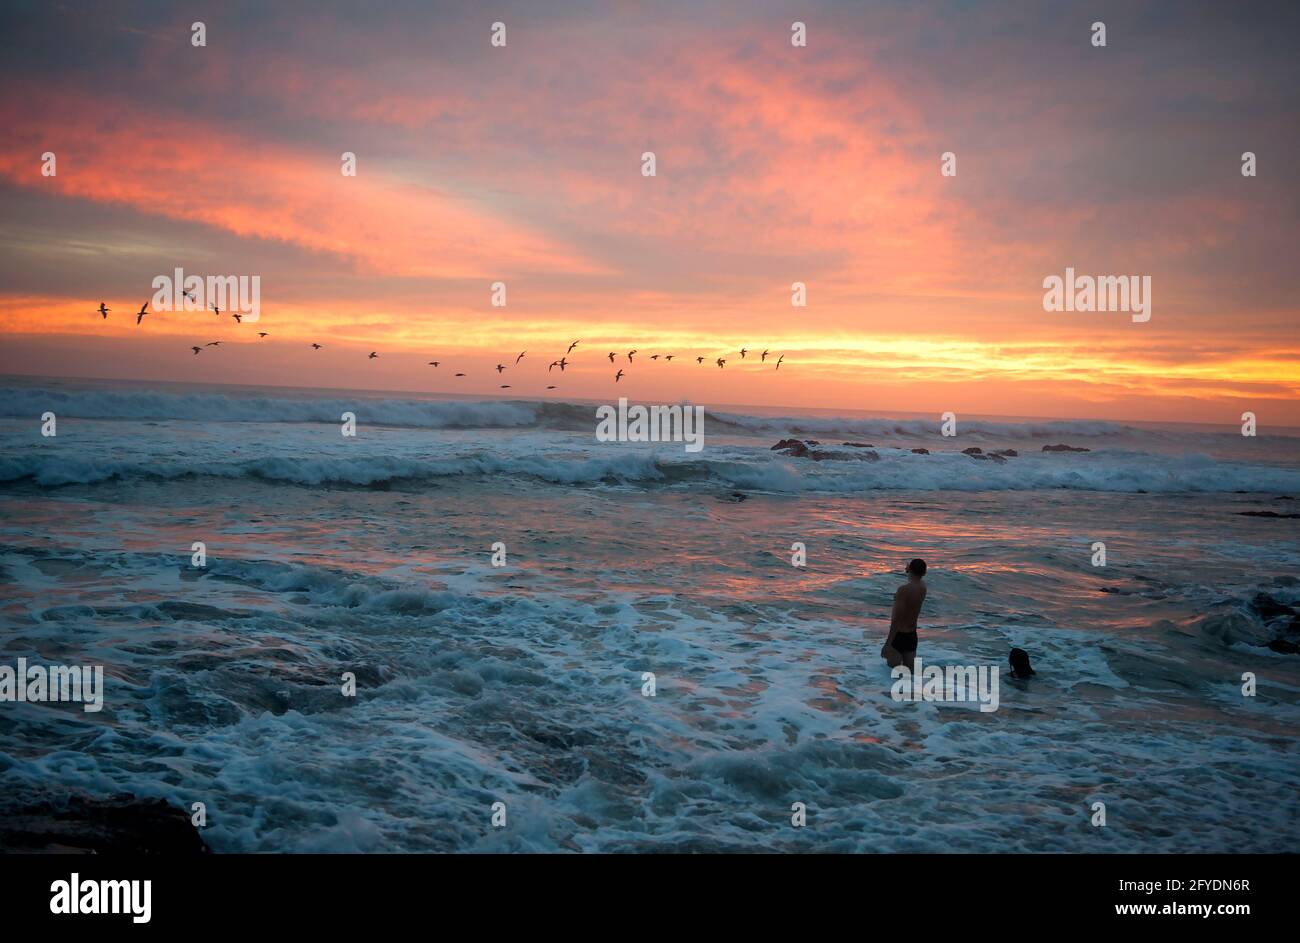 People watching pelicans in flight over ocean at sunset at Tamarindo, Costa Rica. Stock Photo